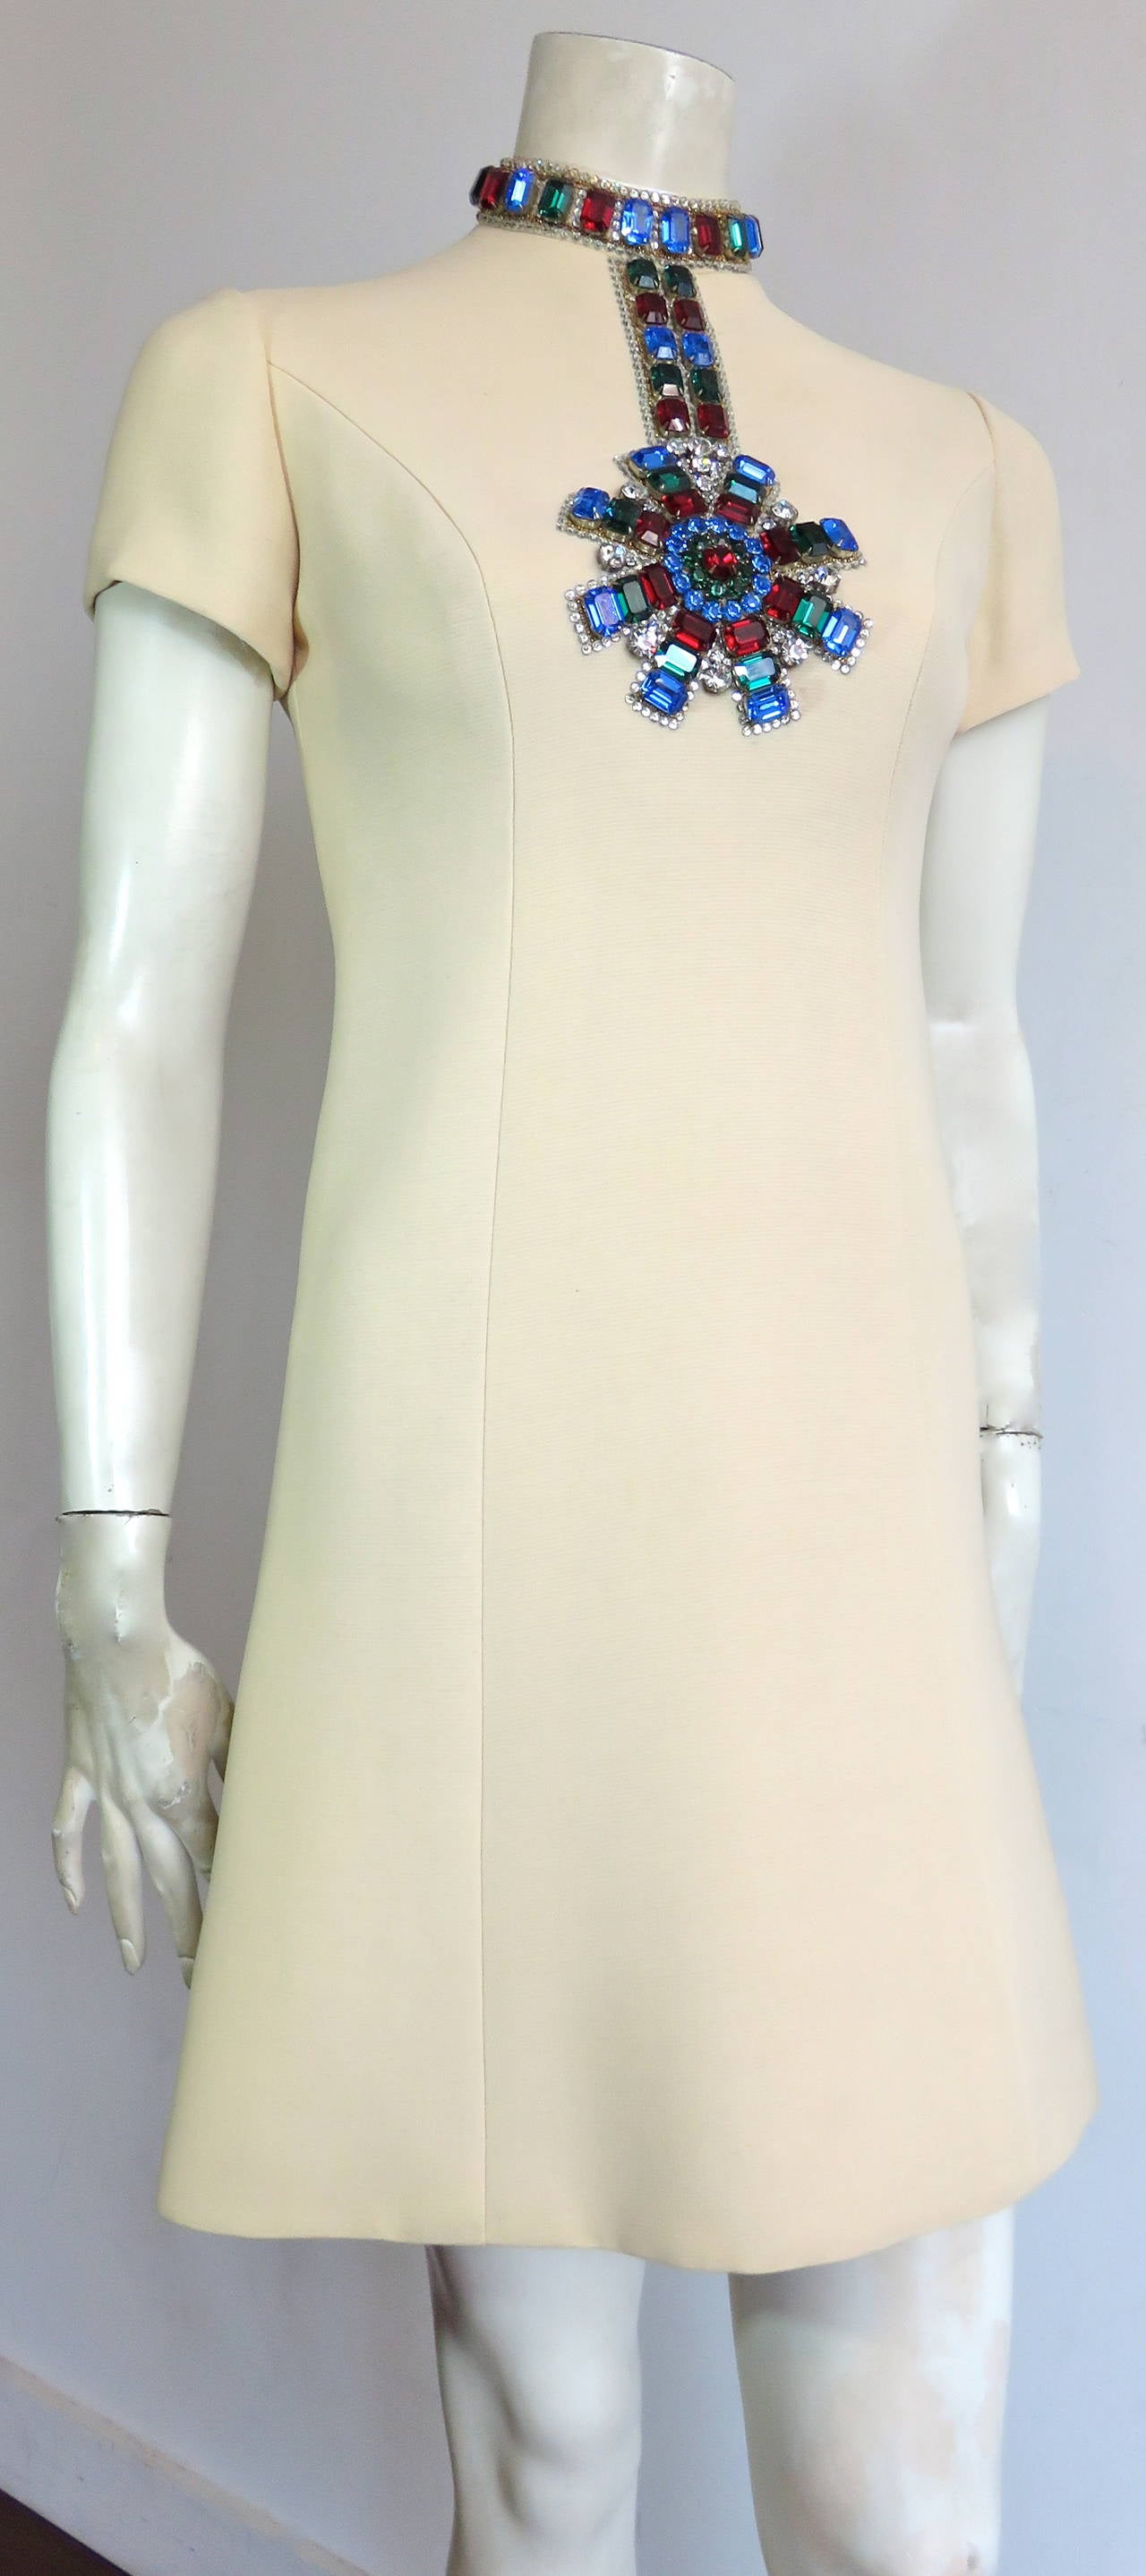 1969 NORMAN NORELL Iconic jeweled cocktail evening dress 1